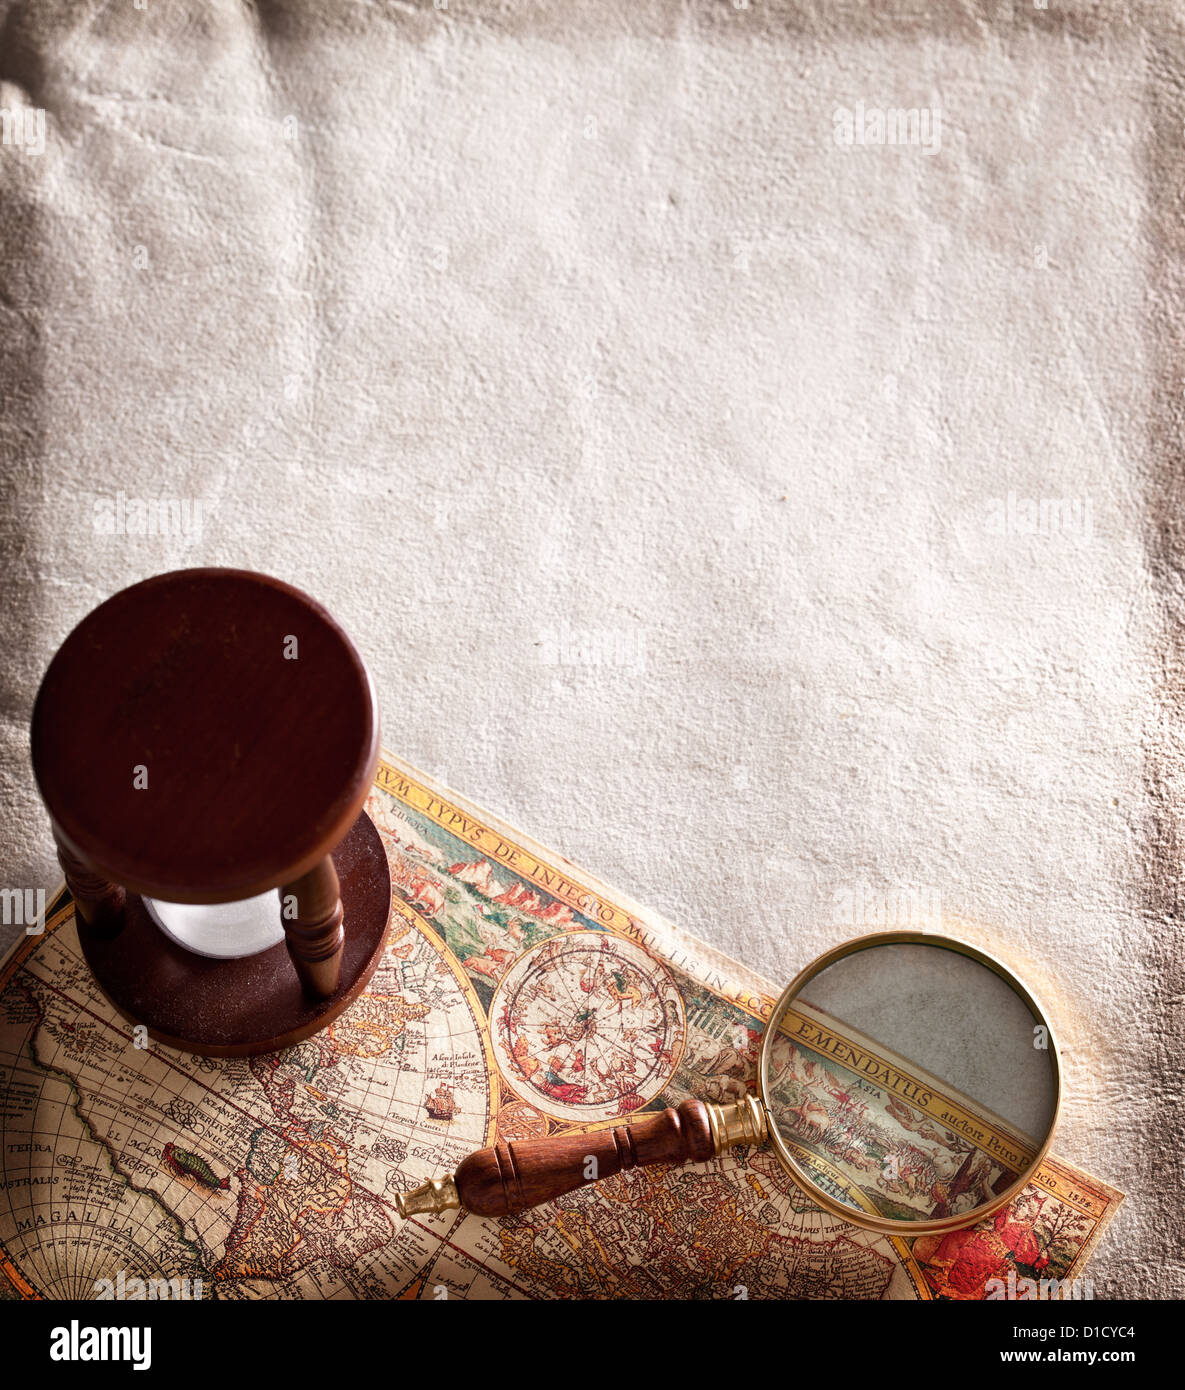 Hourglass with a magnifying glass on old parchment. Stock Photo